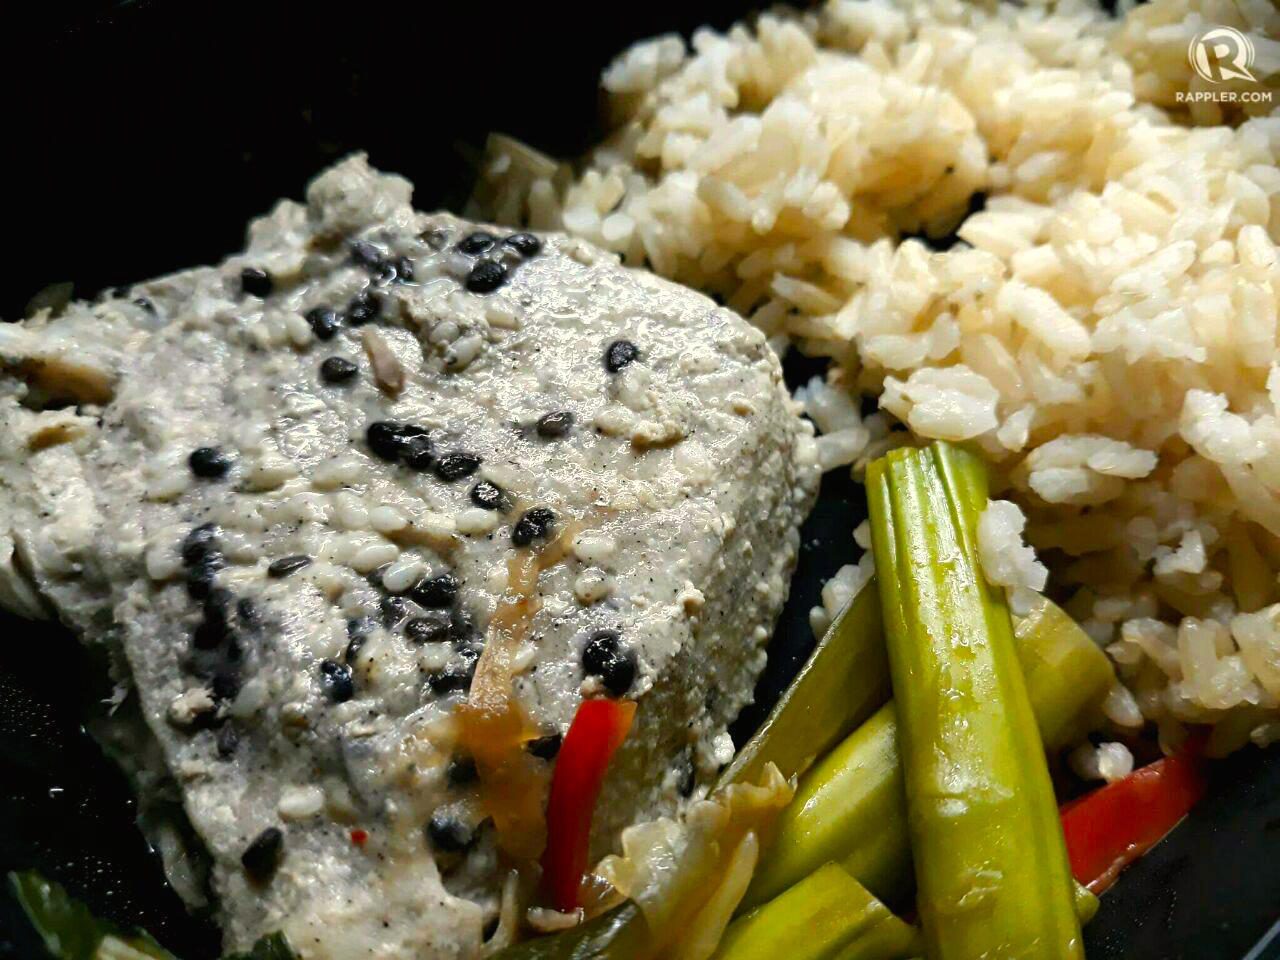 DAY 3. Dinner was sesame crusted tuna with vegetables and brown rice. Photo by Amanda Lago/Rappler 